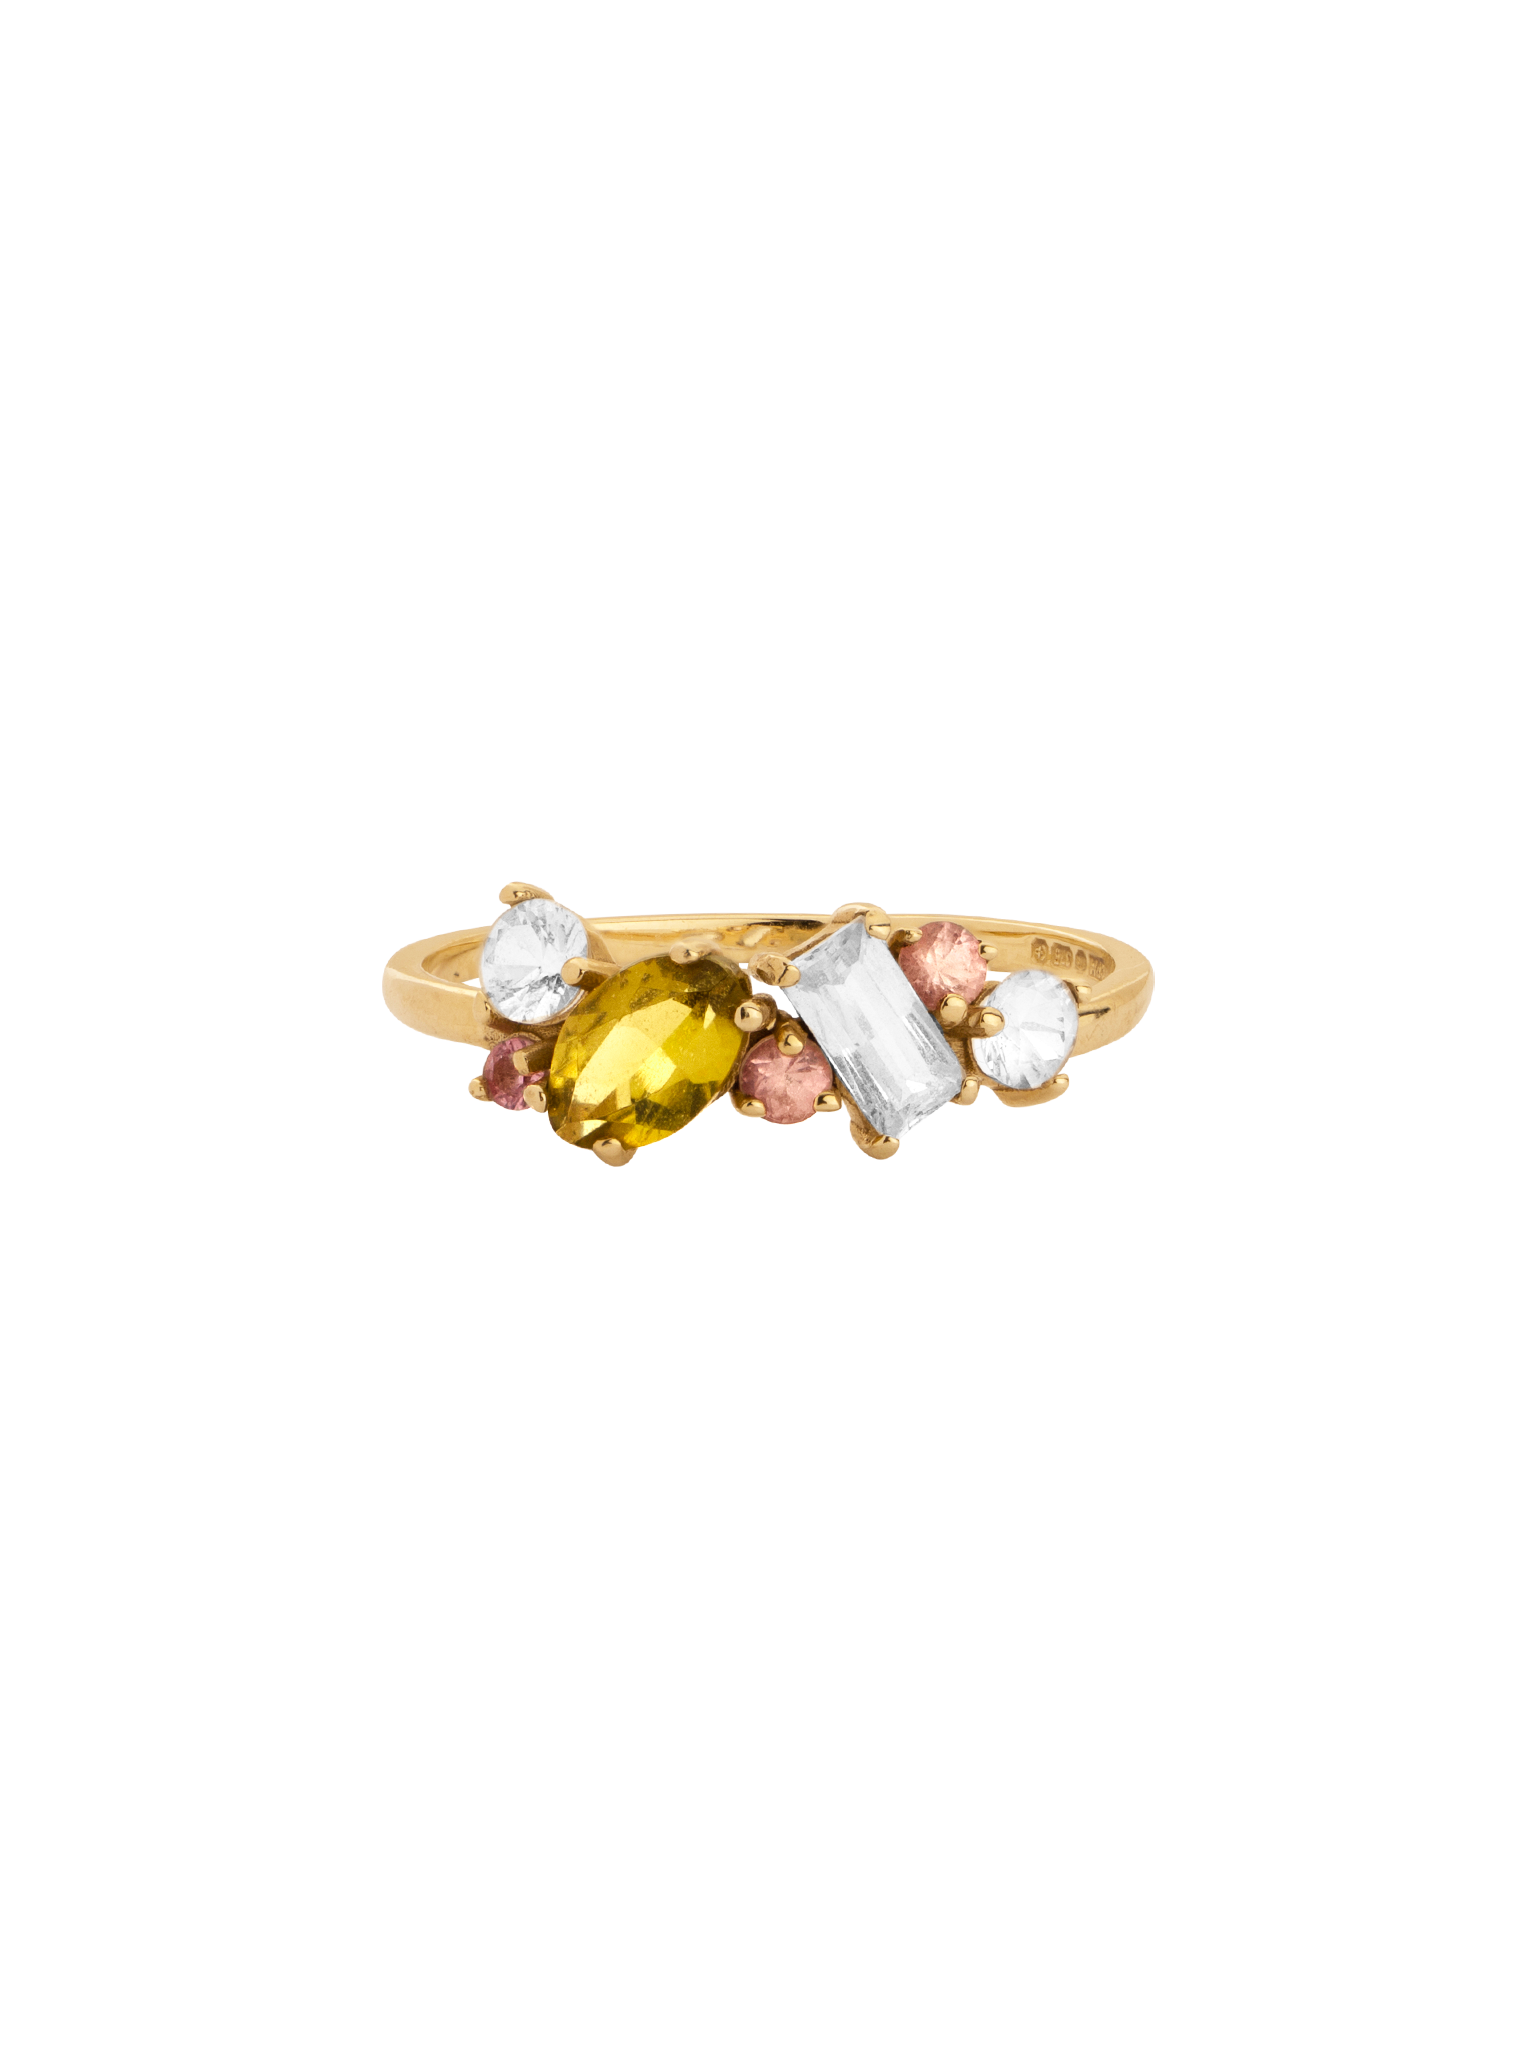 9ct gold pink and green asymmetric cluster engagement ring